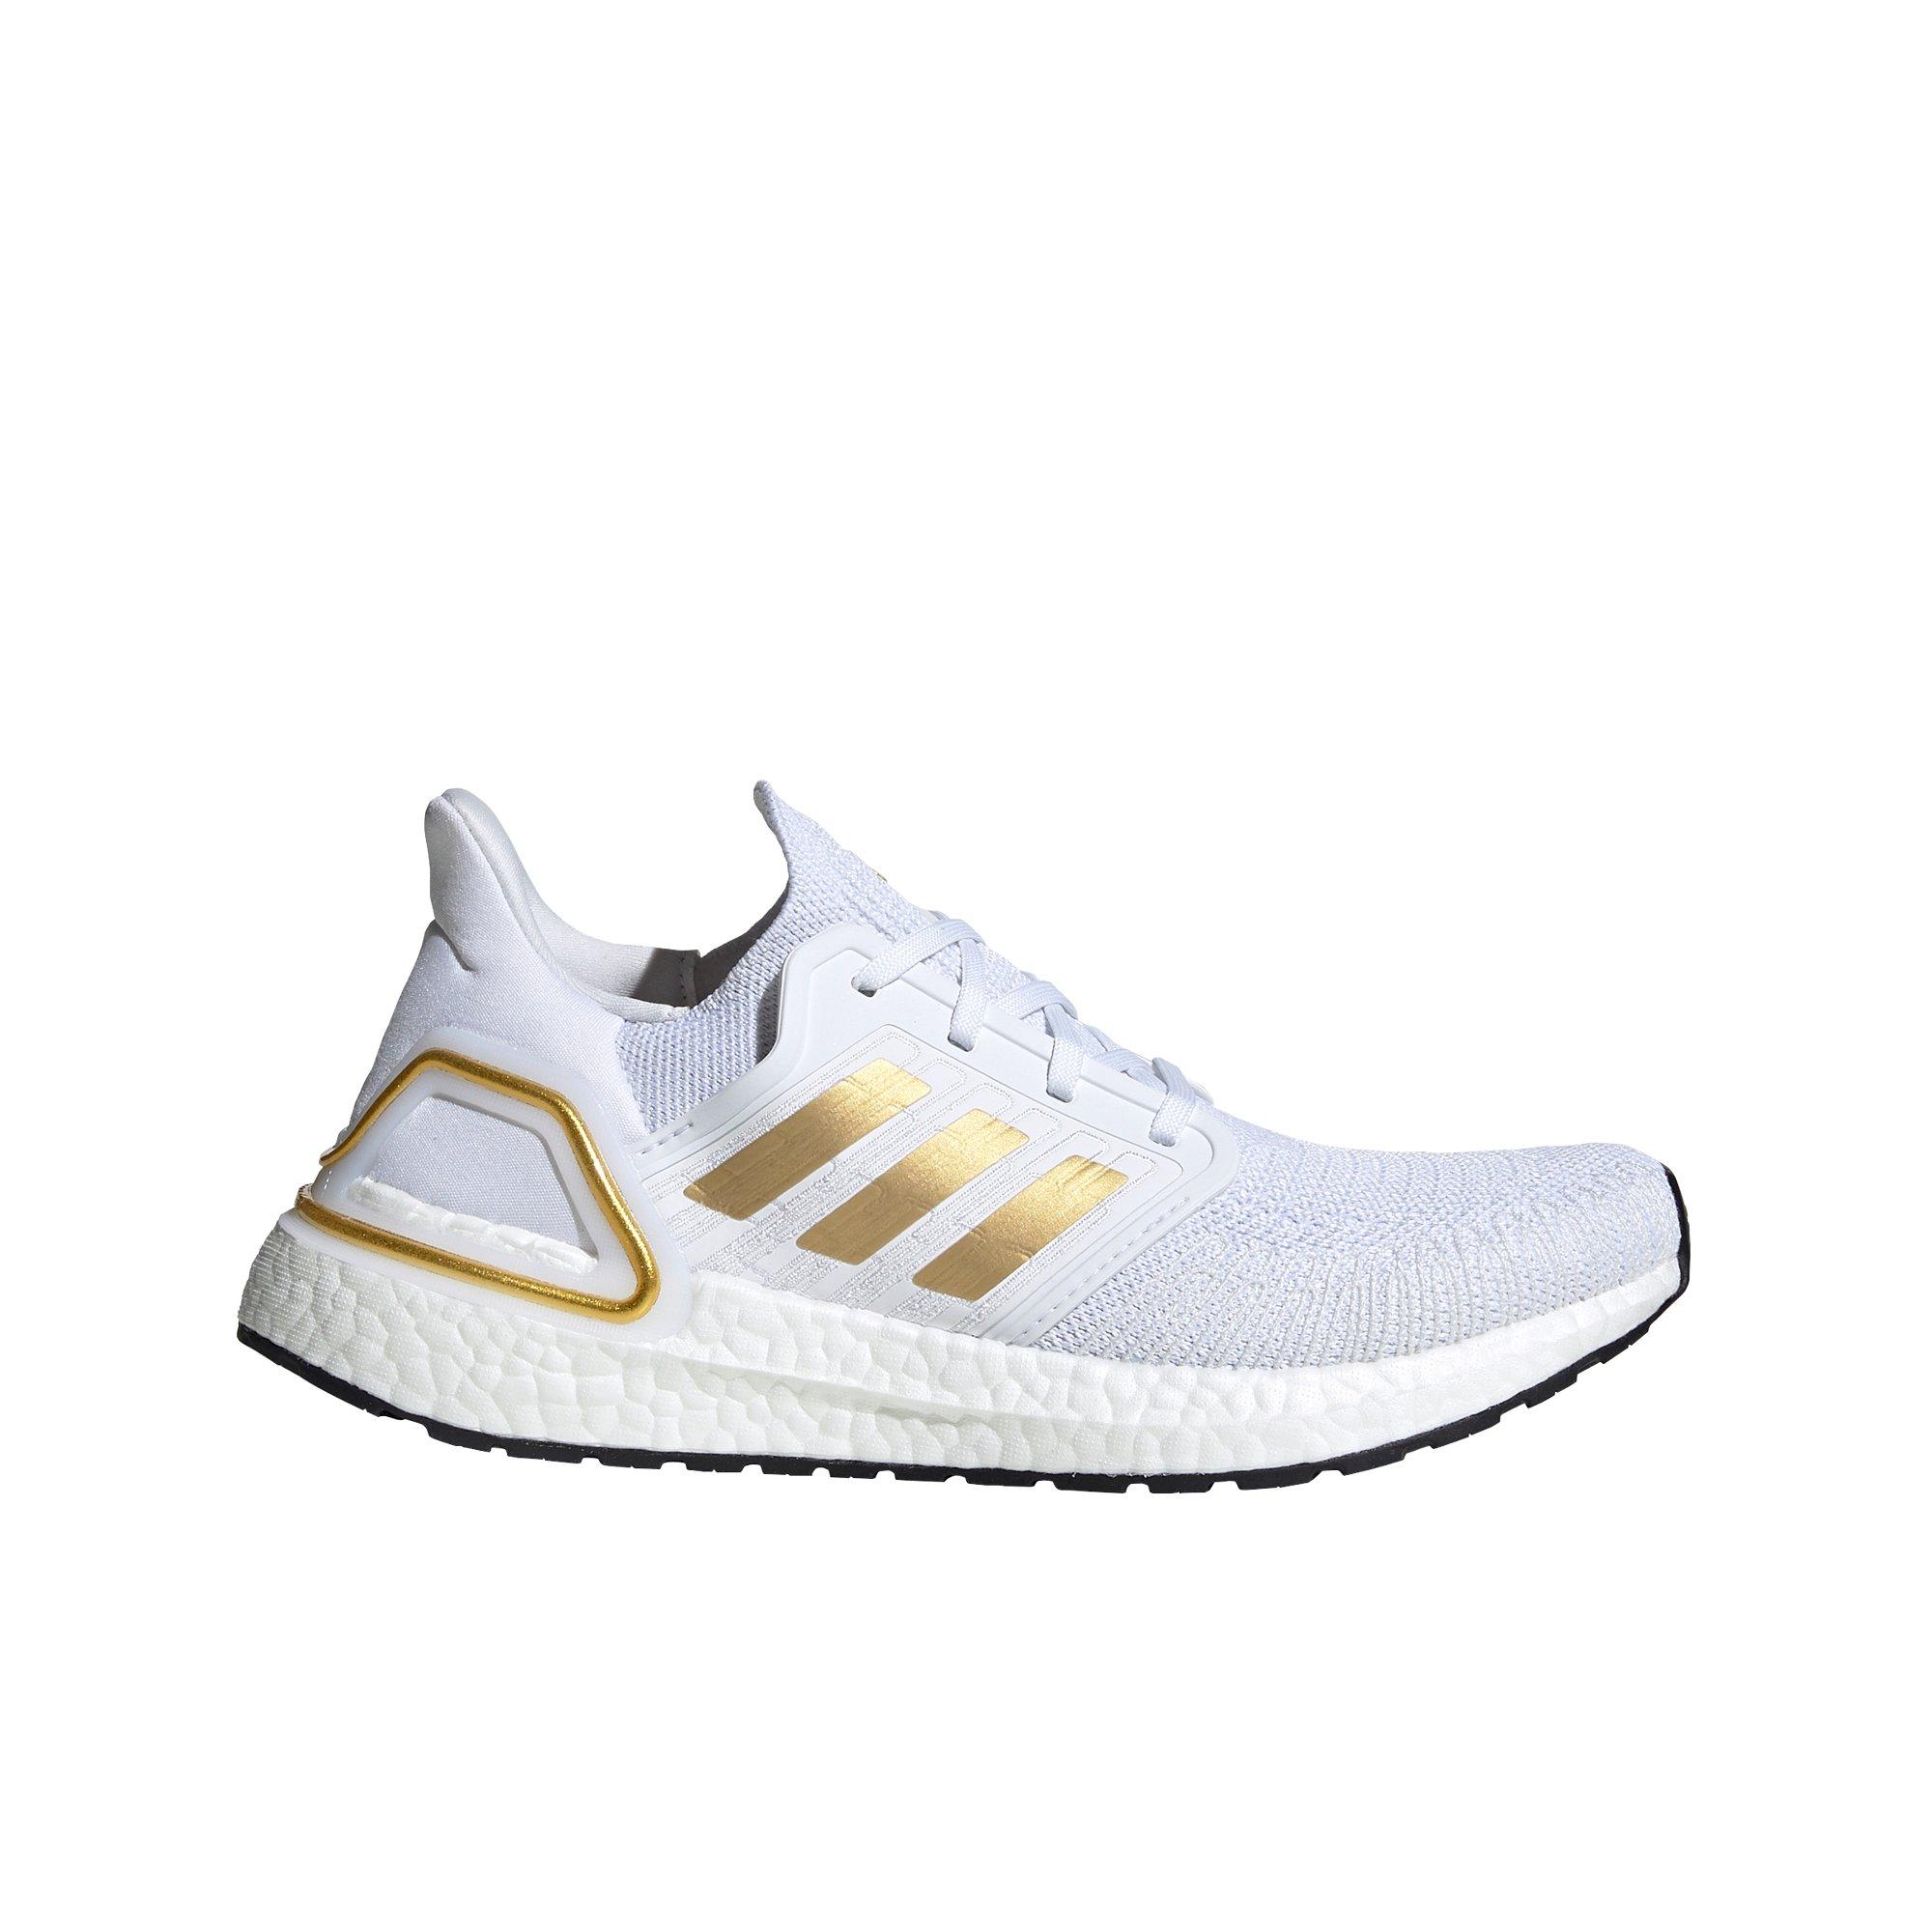 Adidas Ultraboost White And Gold For Sale Off 77